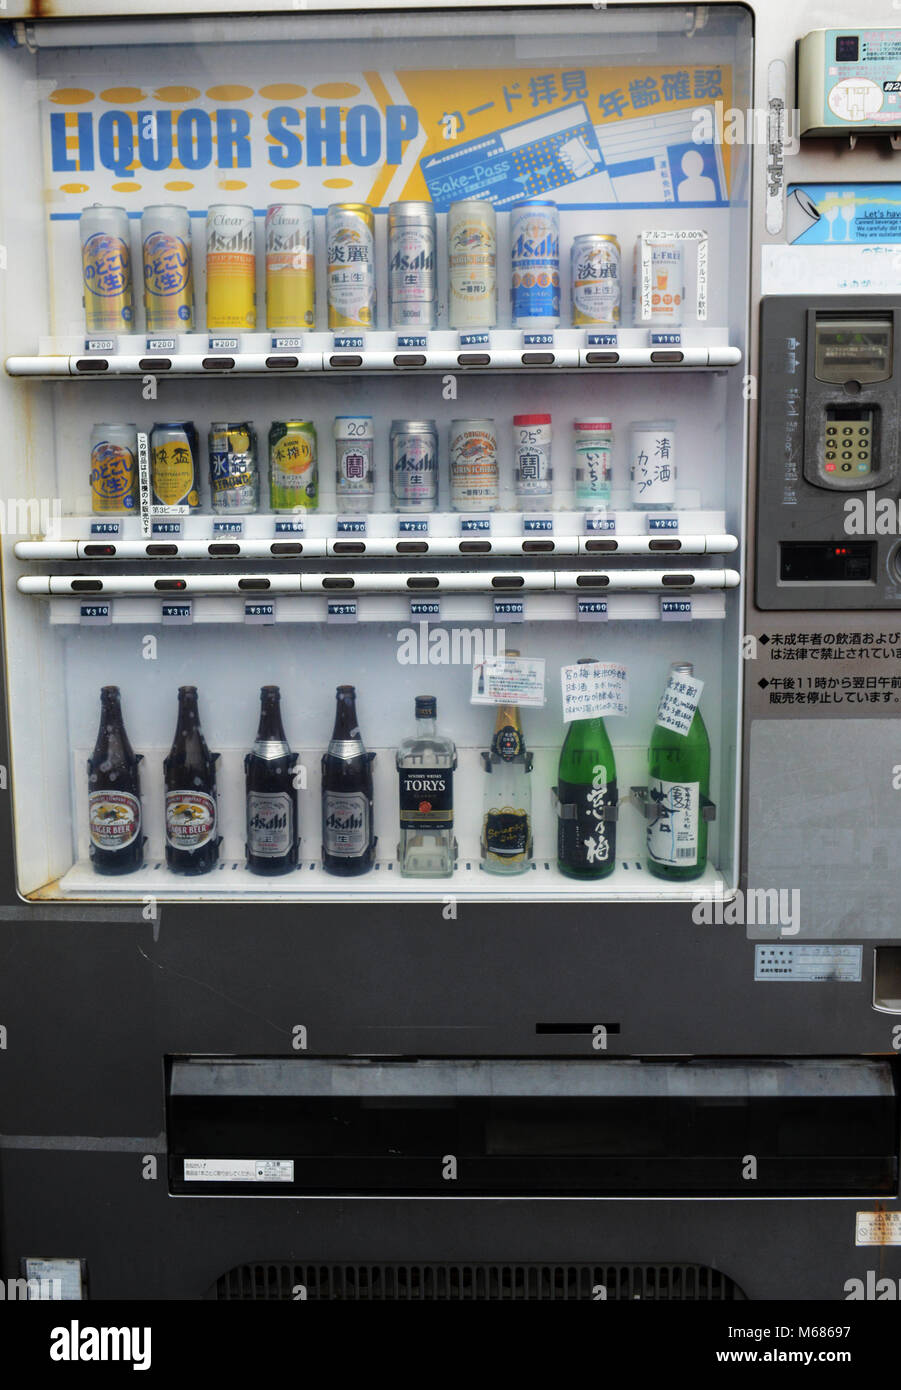 Vending Machines and Alcohol?